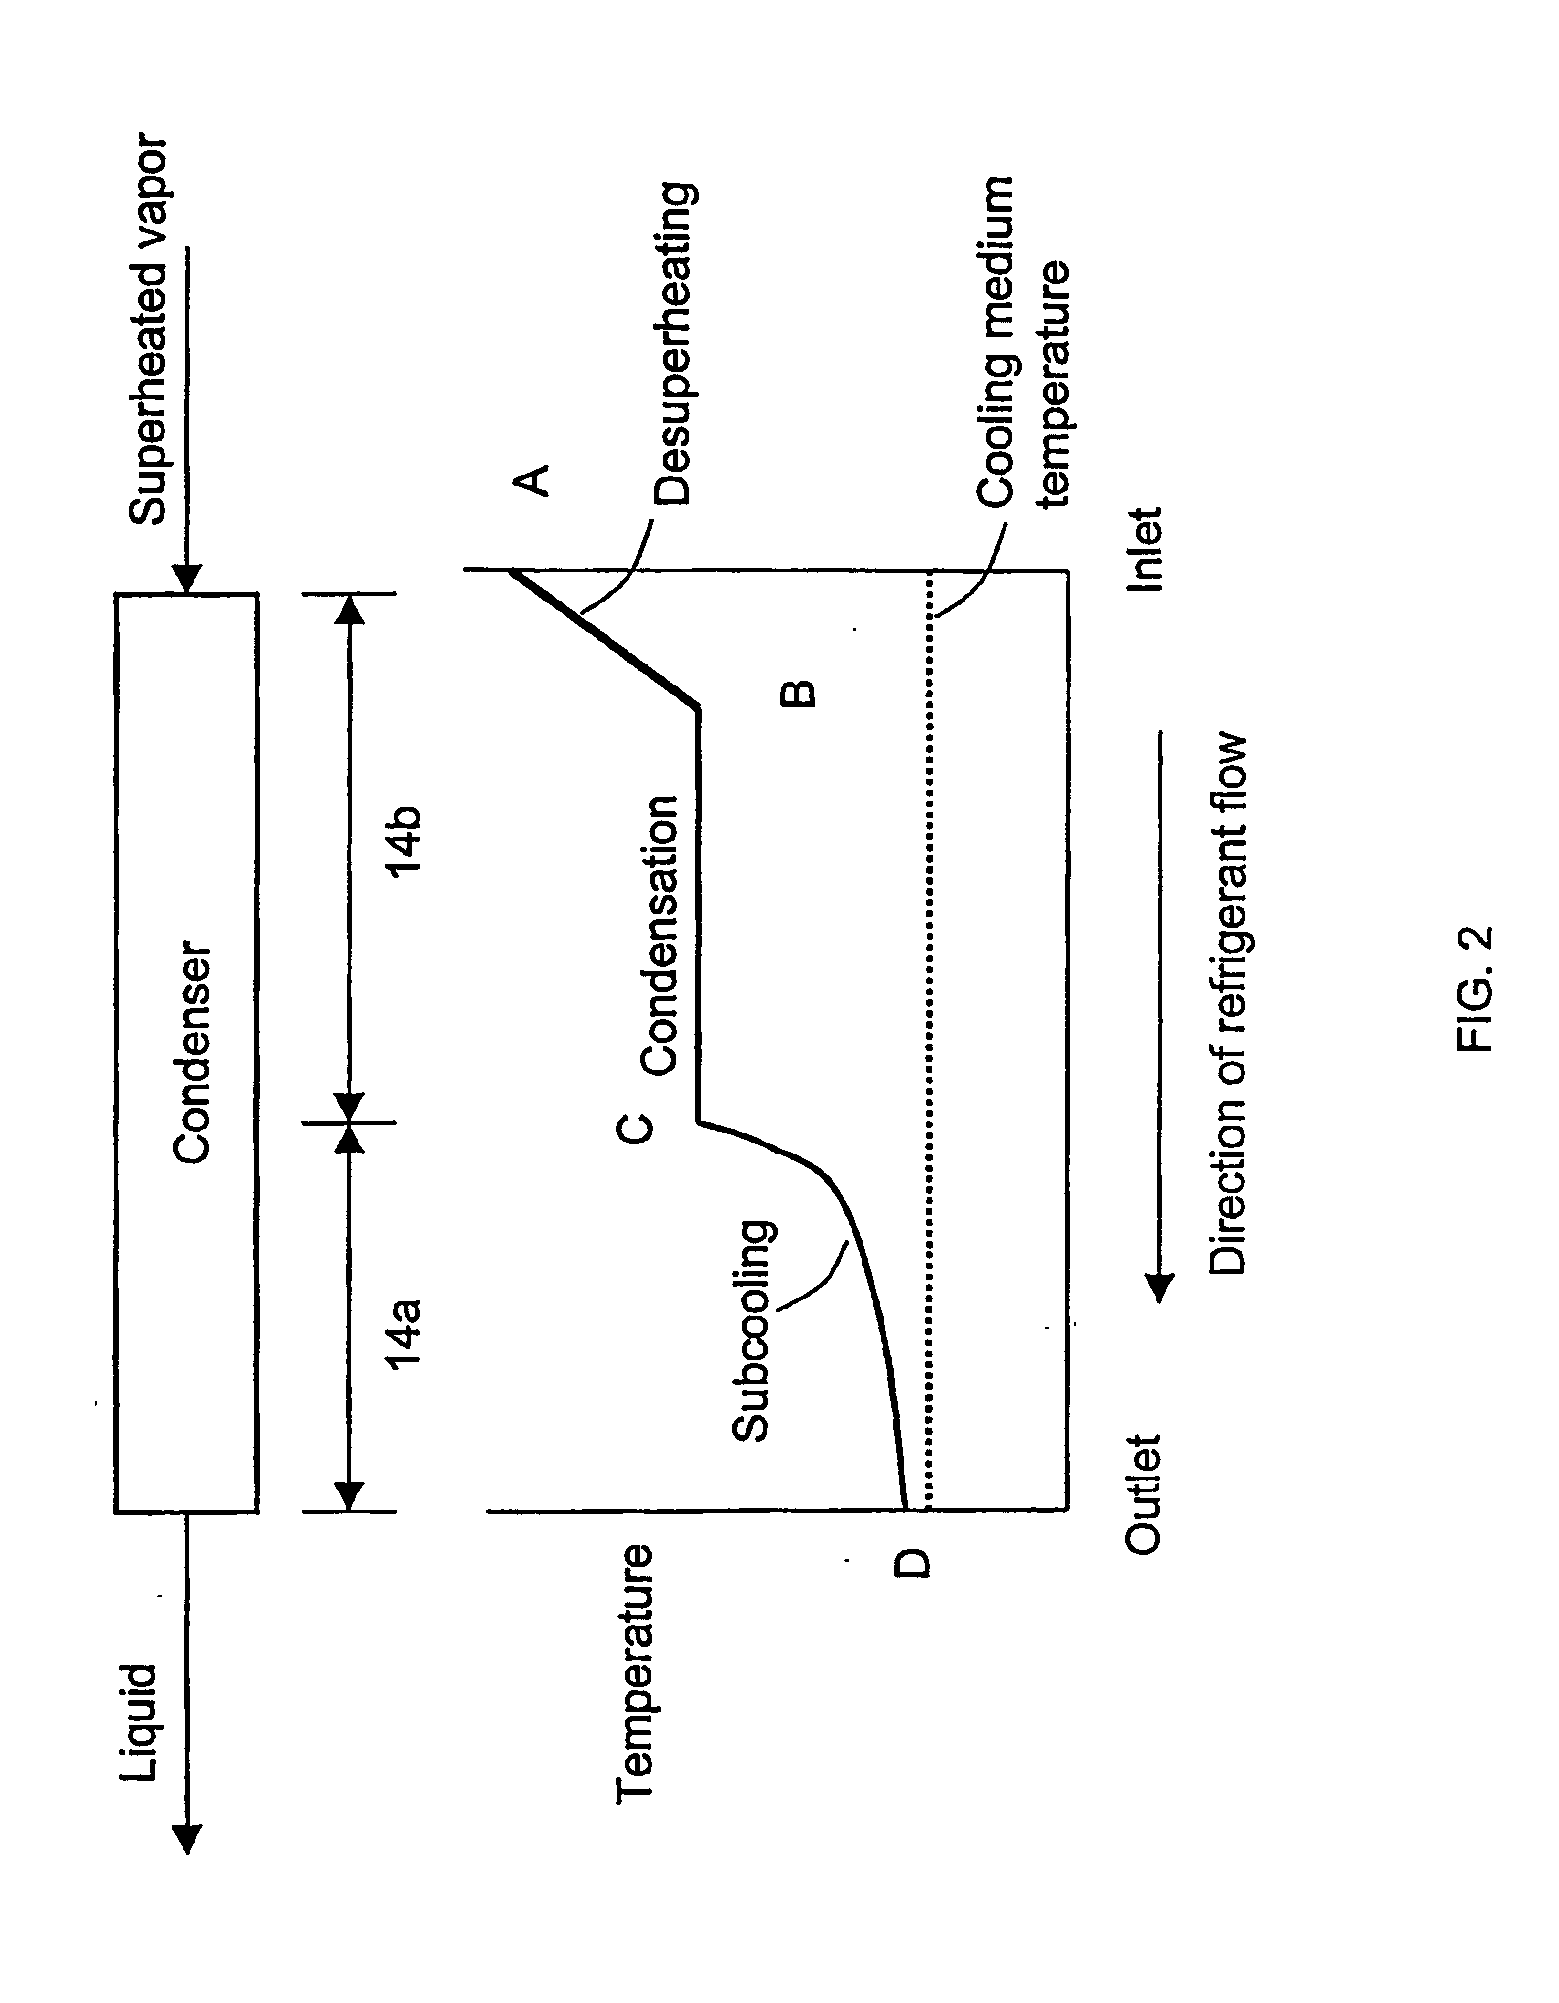 Refrigeration system with bypass subcooling and component size de-optimization